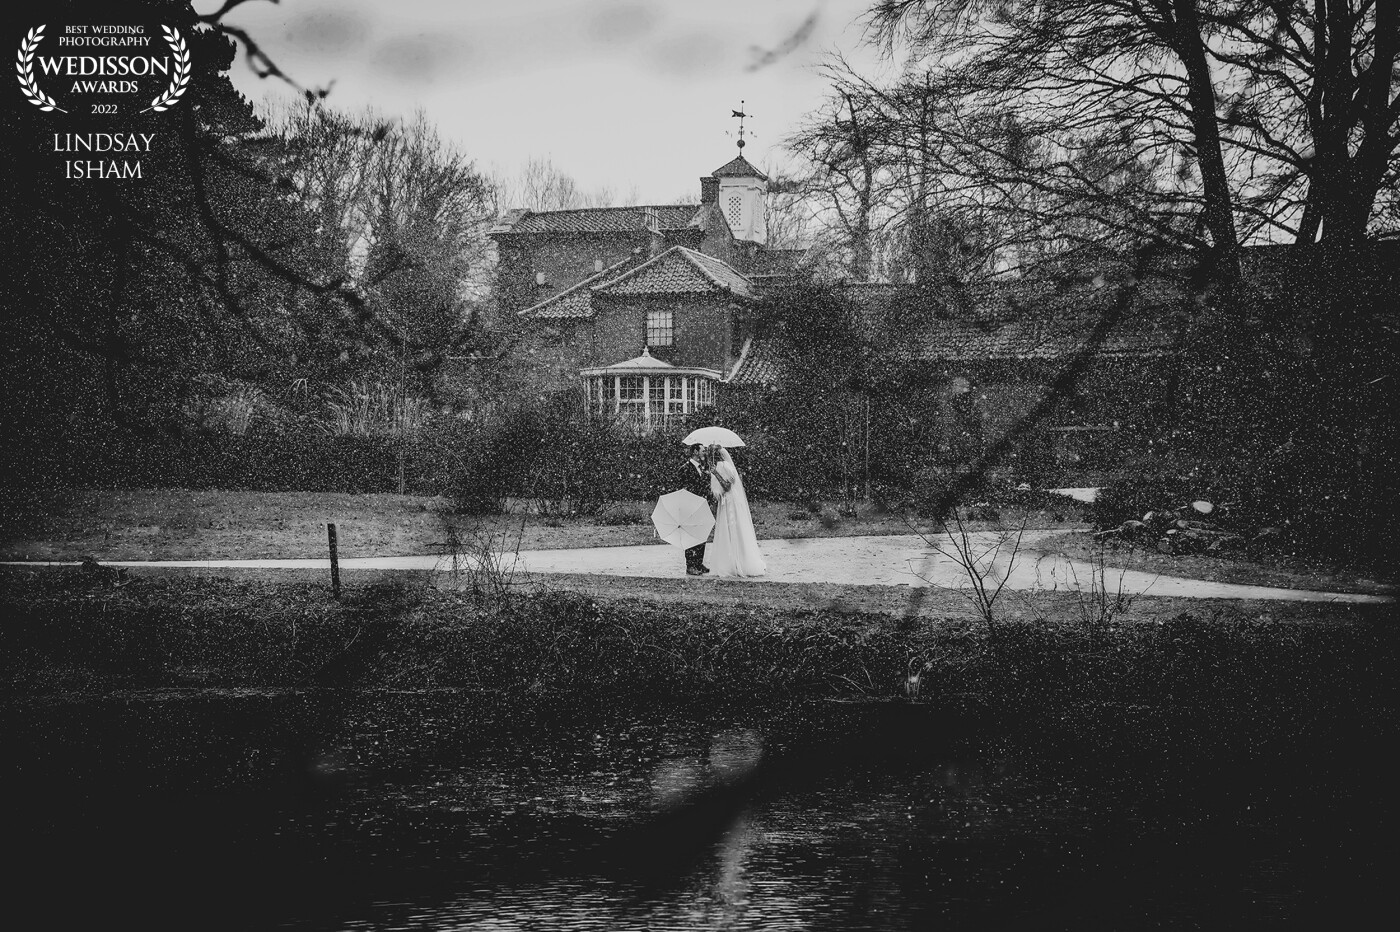 This was such a magical day in so many ways!  The weather didn't appear to be on Dan & Brittaney's side, however, that didn't stop venturing out in the grounds of the stunningly beautiful grounds of Elsham Hall on their snow filled wedding day.  I love the moodiness of this black & white photo.  If I could have snow on every wedding day... I would!